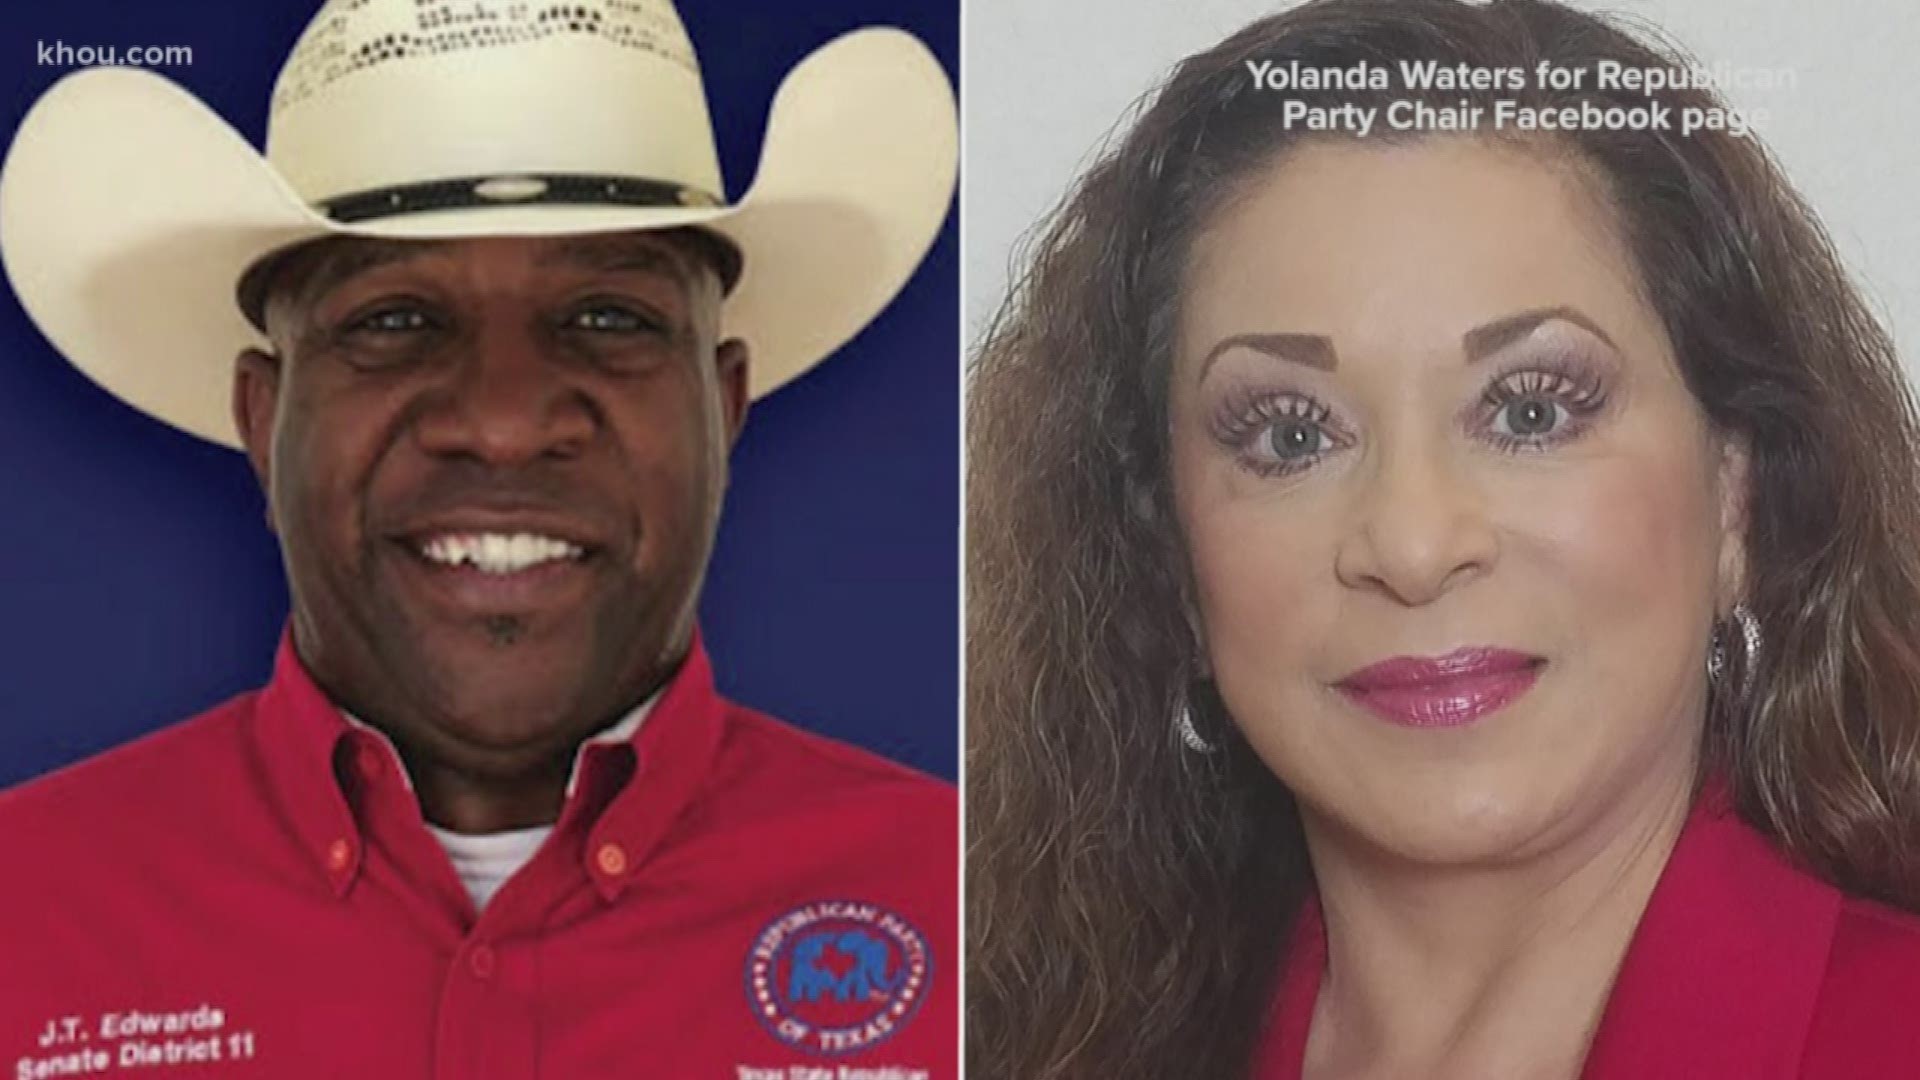 Yolanda Waters is being asked to resign from her position as the chairwoman of the Republican party in Galveston County.